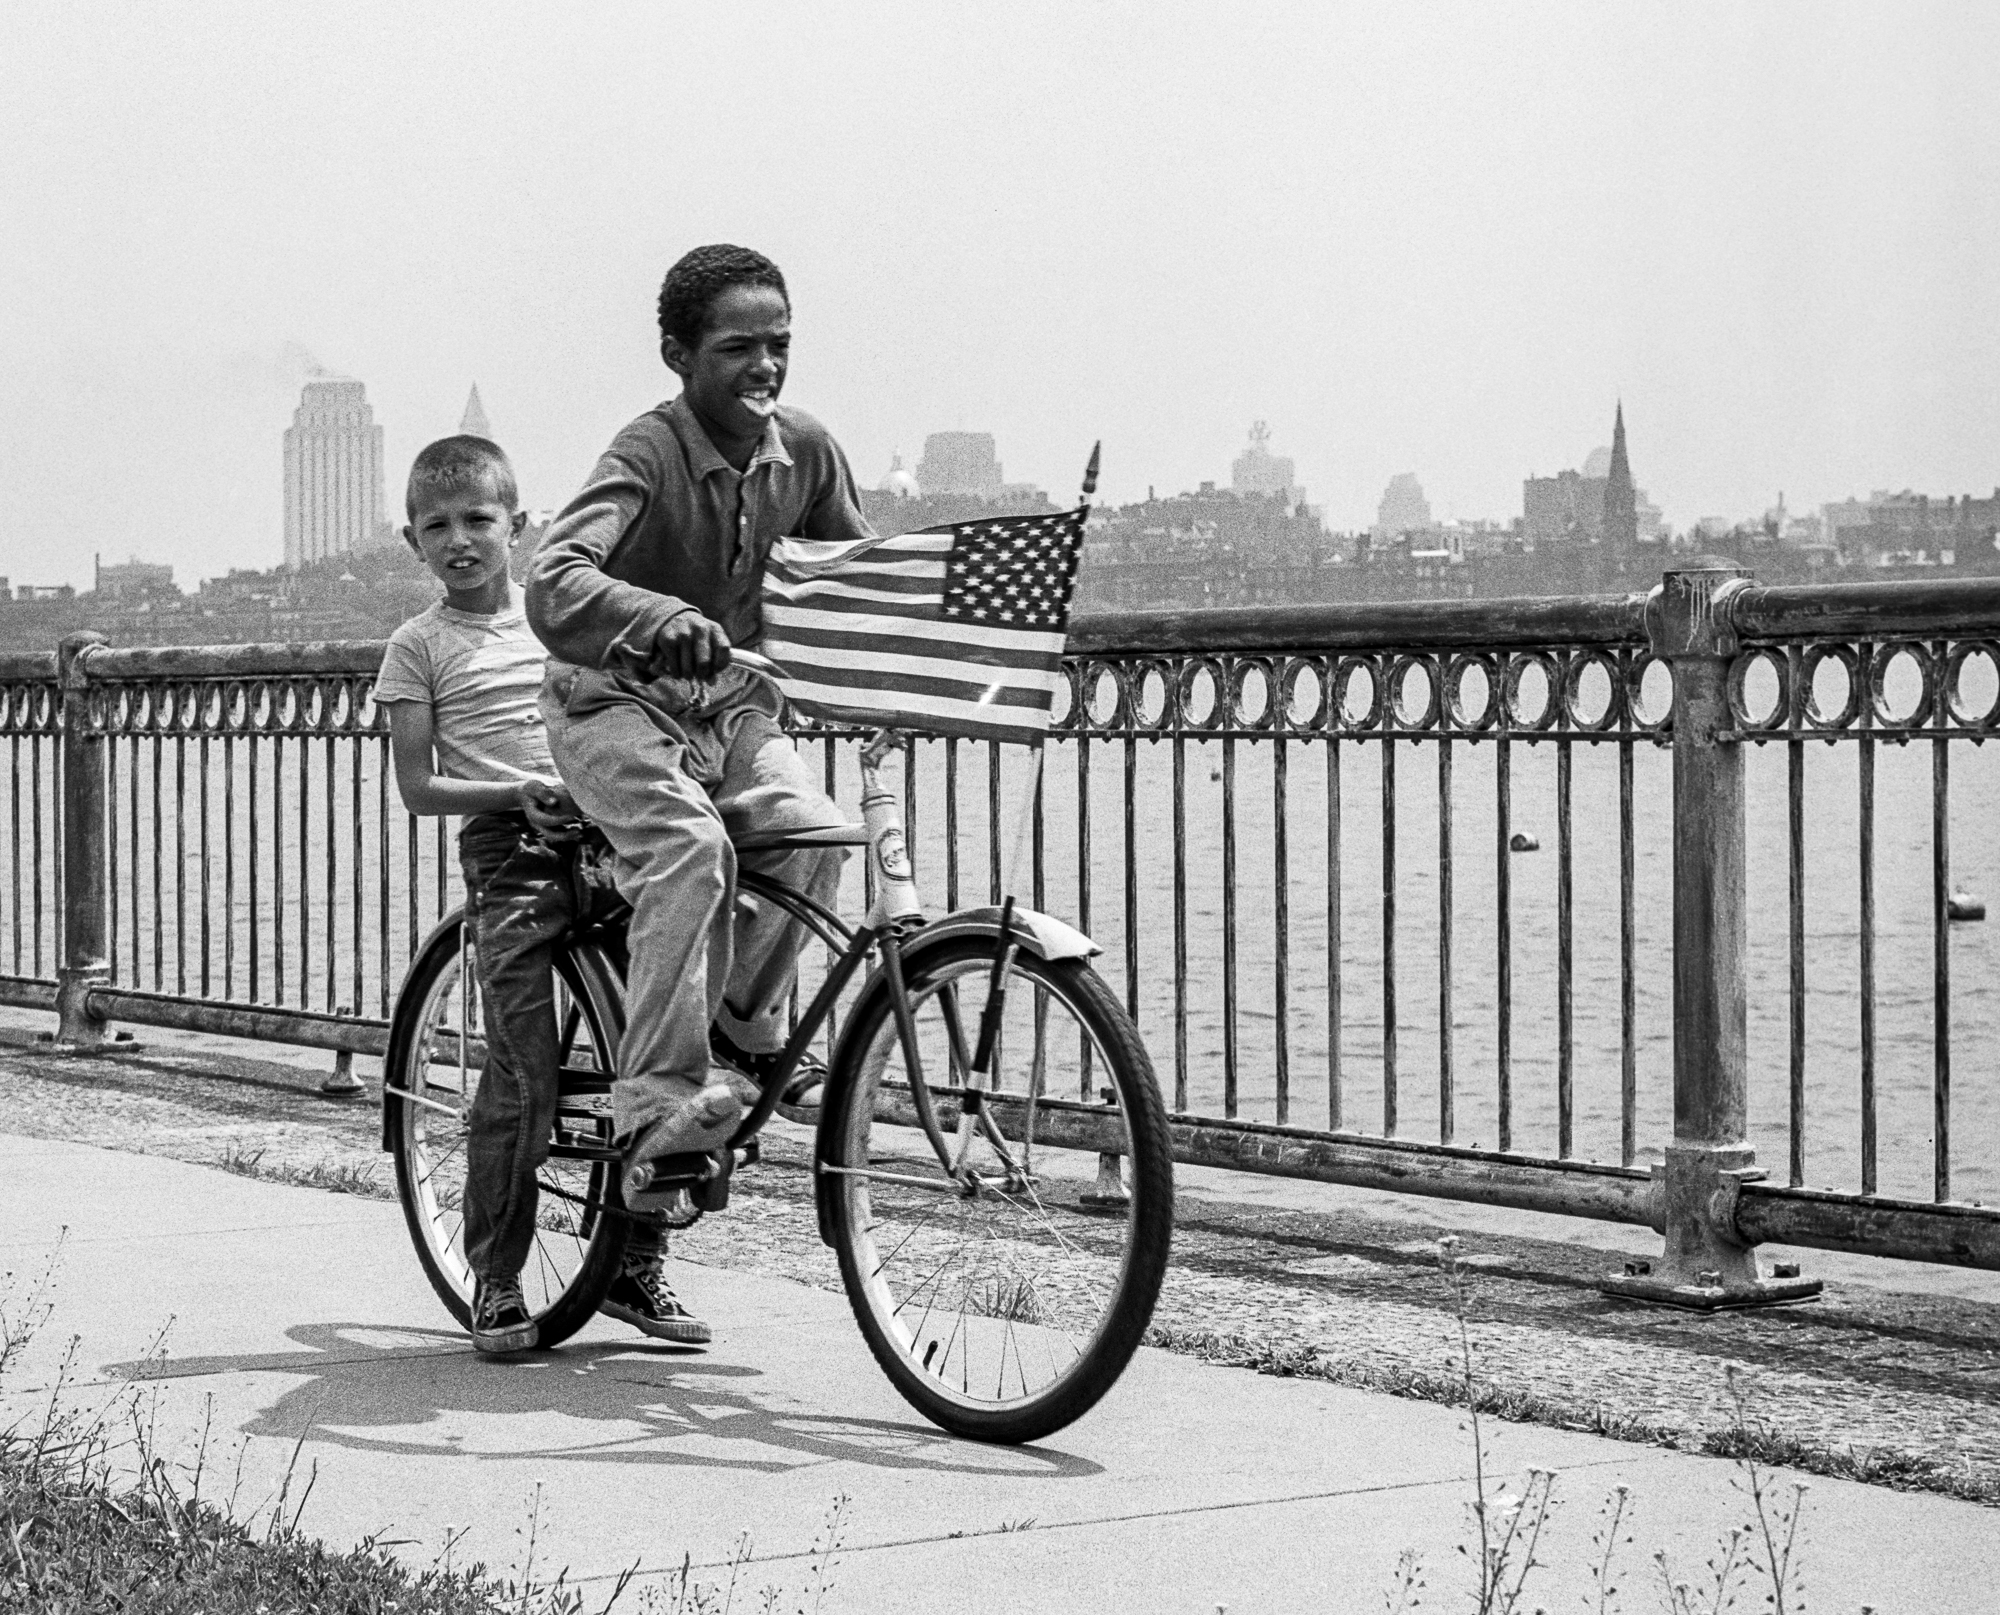 Black and white photo of two boys riding a bicycle in an urban landscape